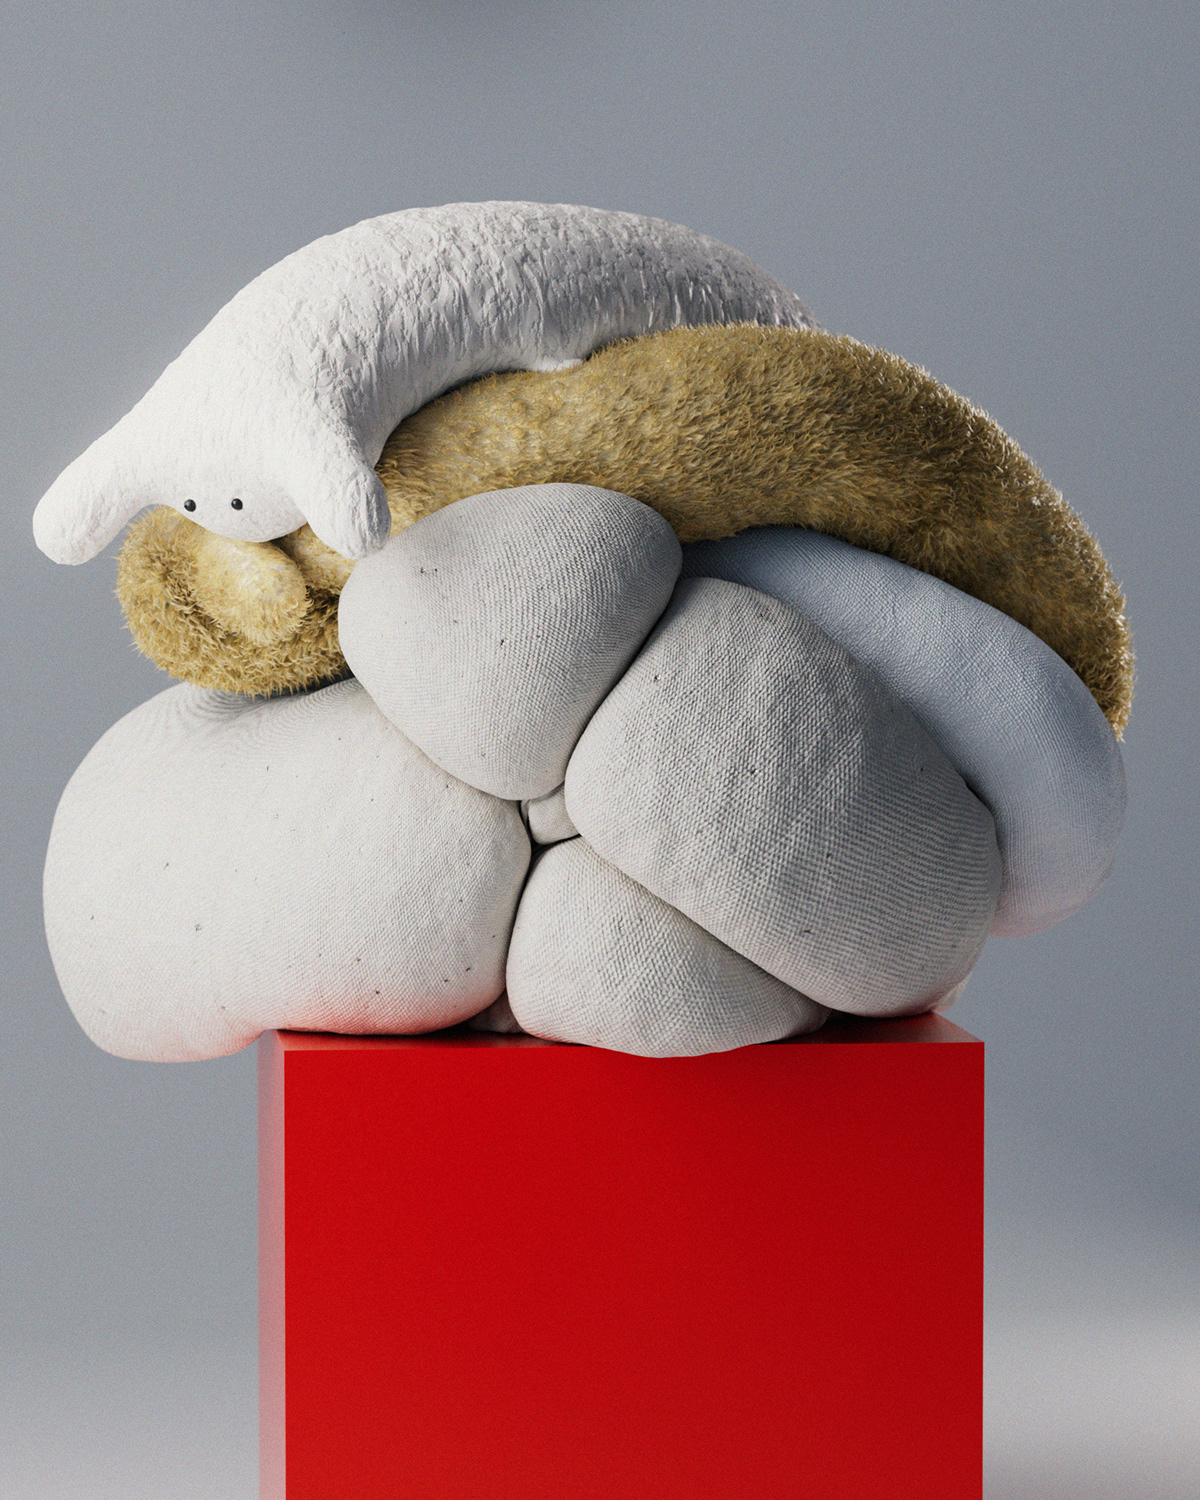 Artifact from the Exploring the Art of 3D Soft Body Character Design article on Abduzeedo